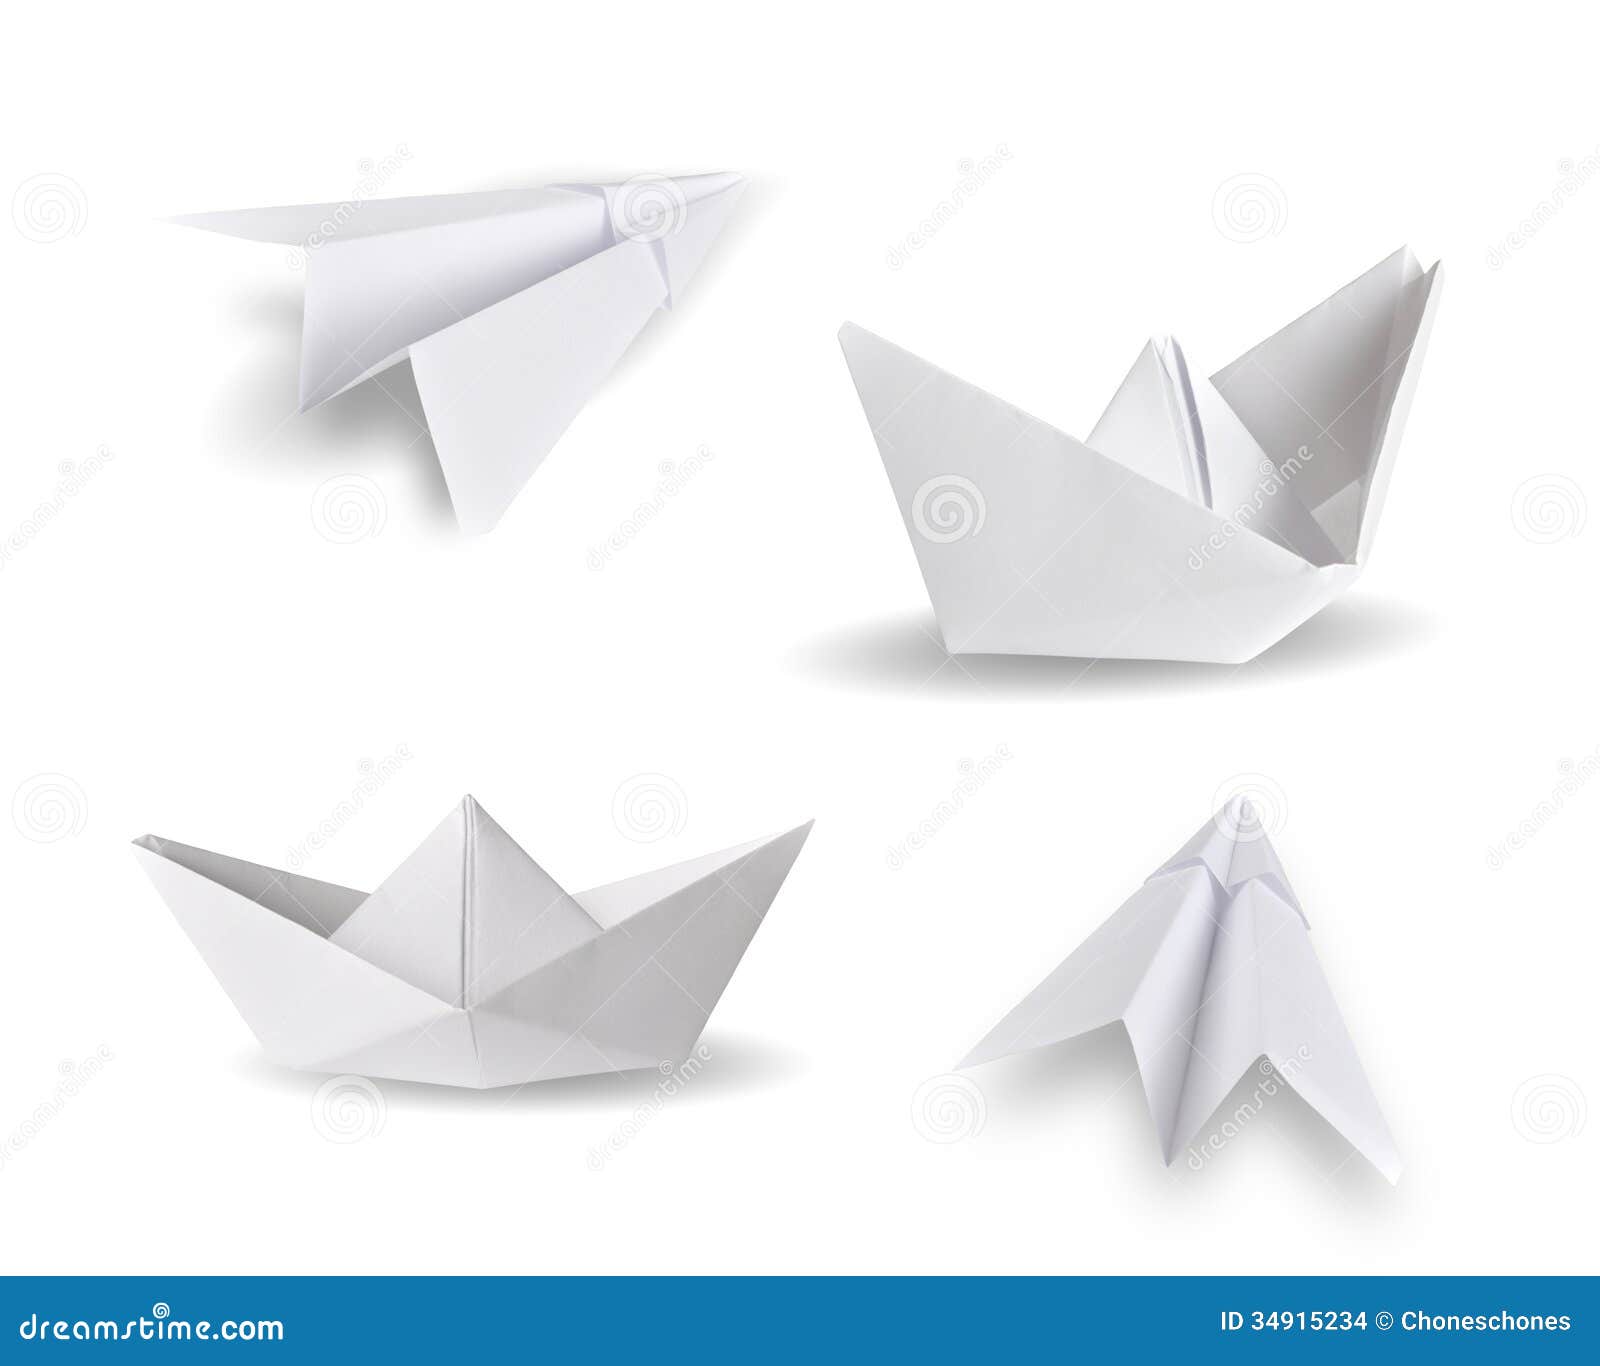 paper ships and paper planes stock images - image: 34915234